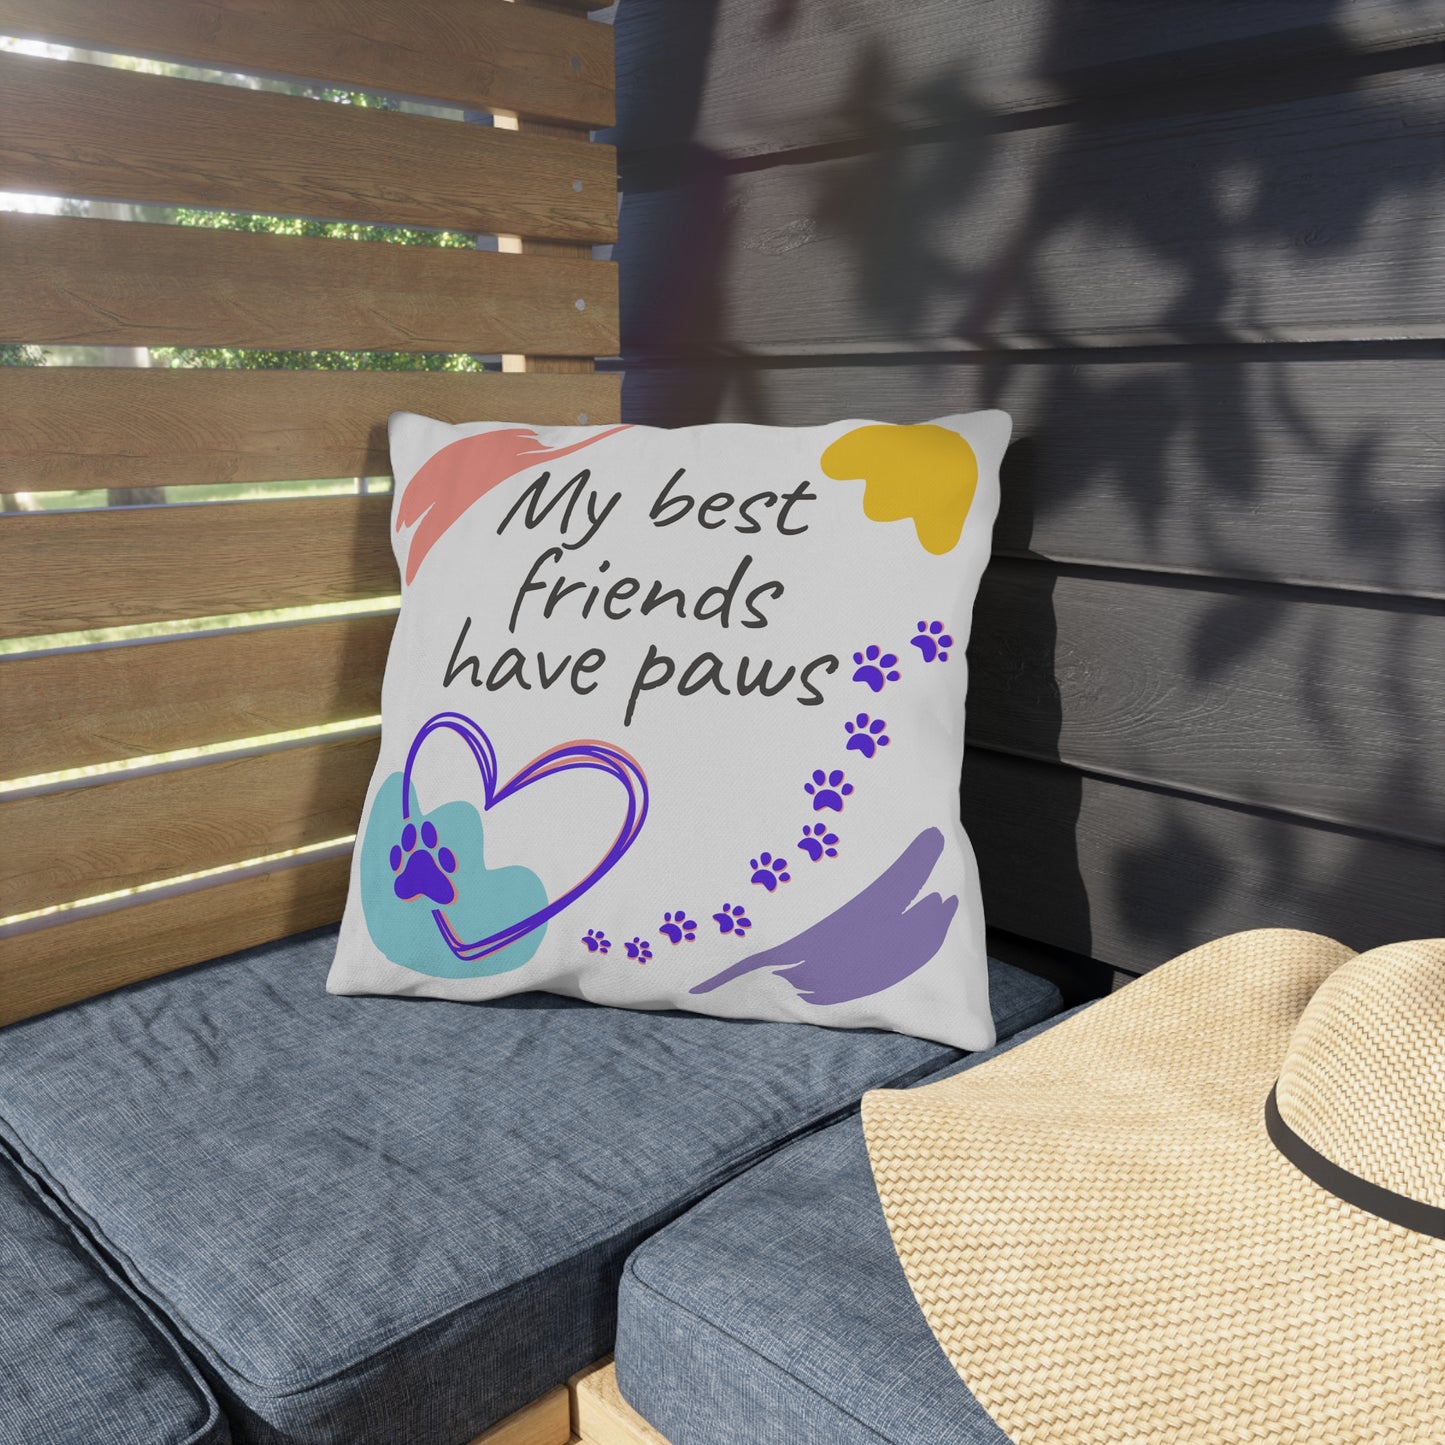 Pet-Lover Patio Pillow, "My Best Friends Have Paws" Design, UV- and Mildew-Resistant